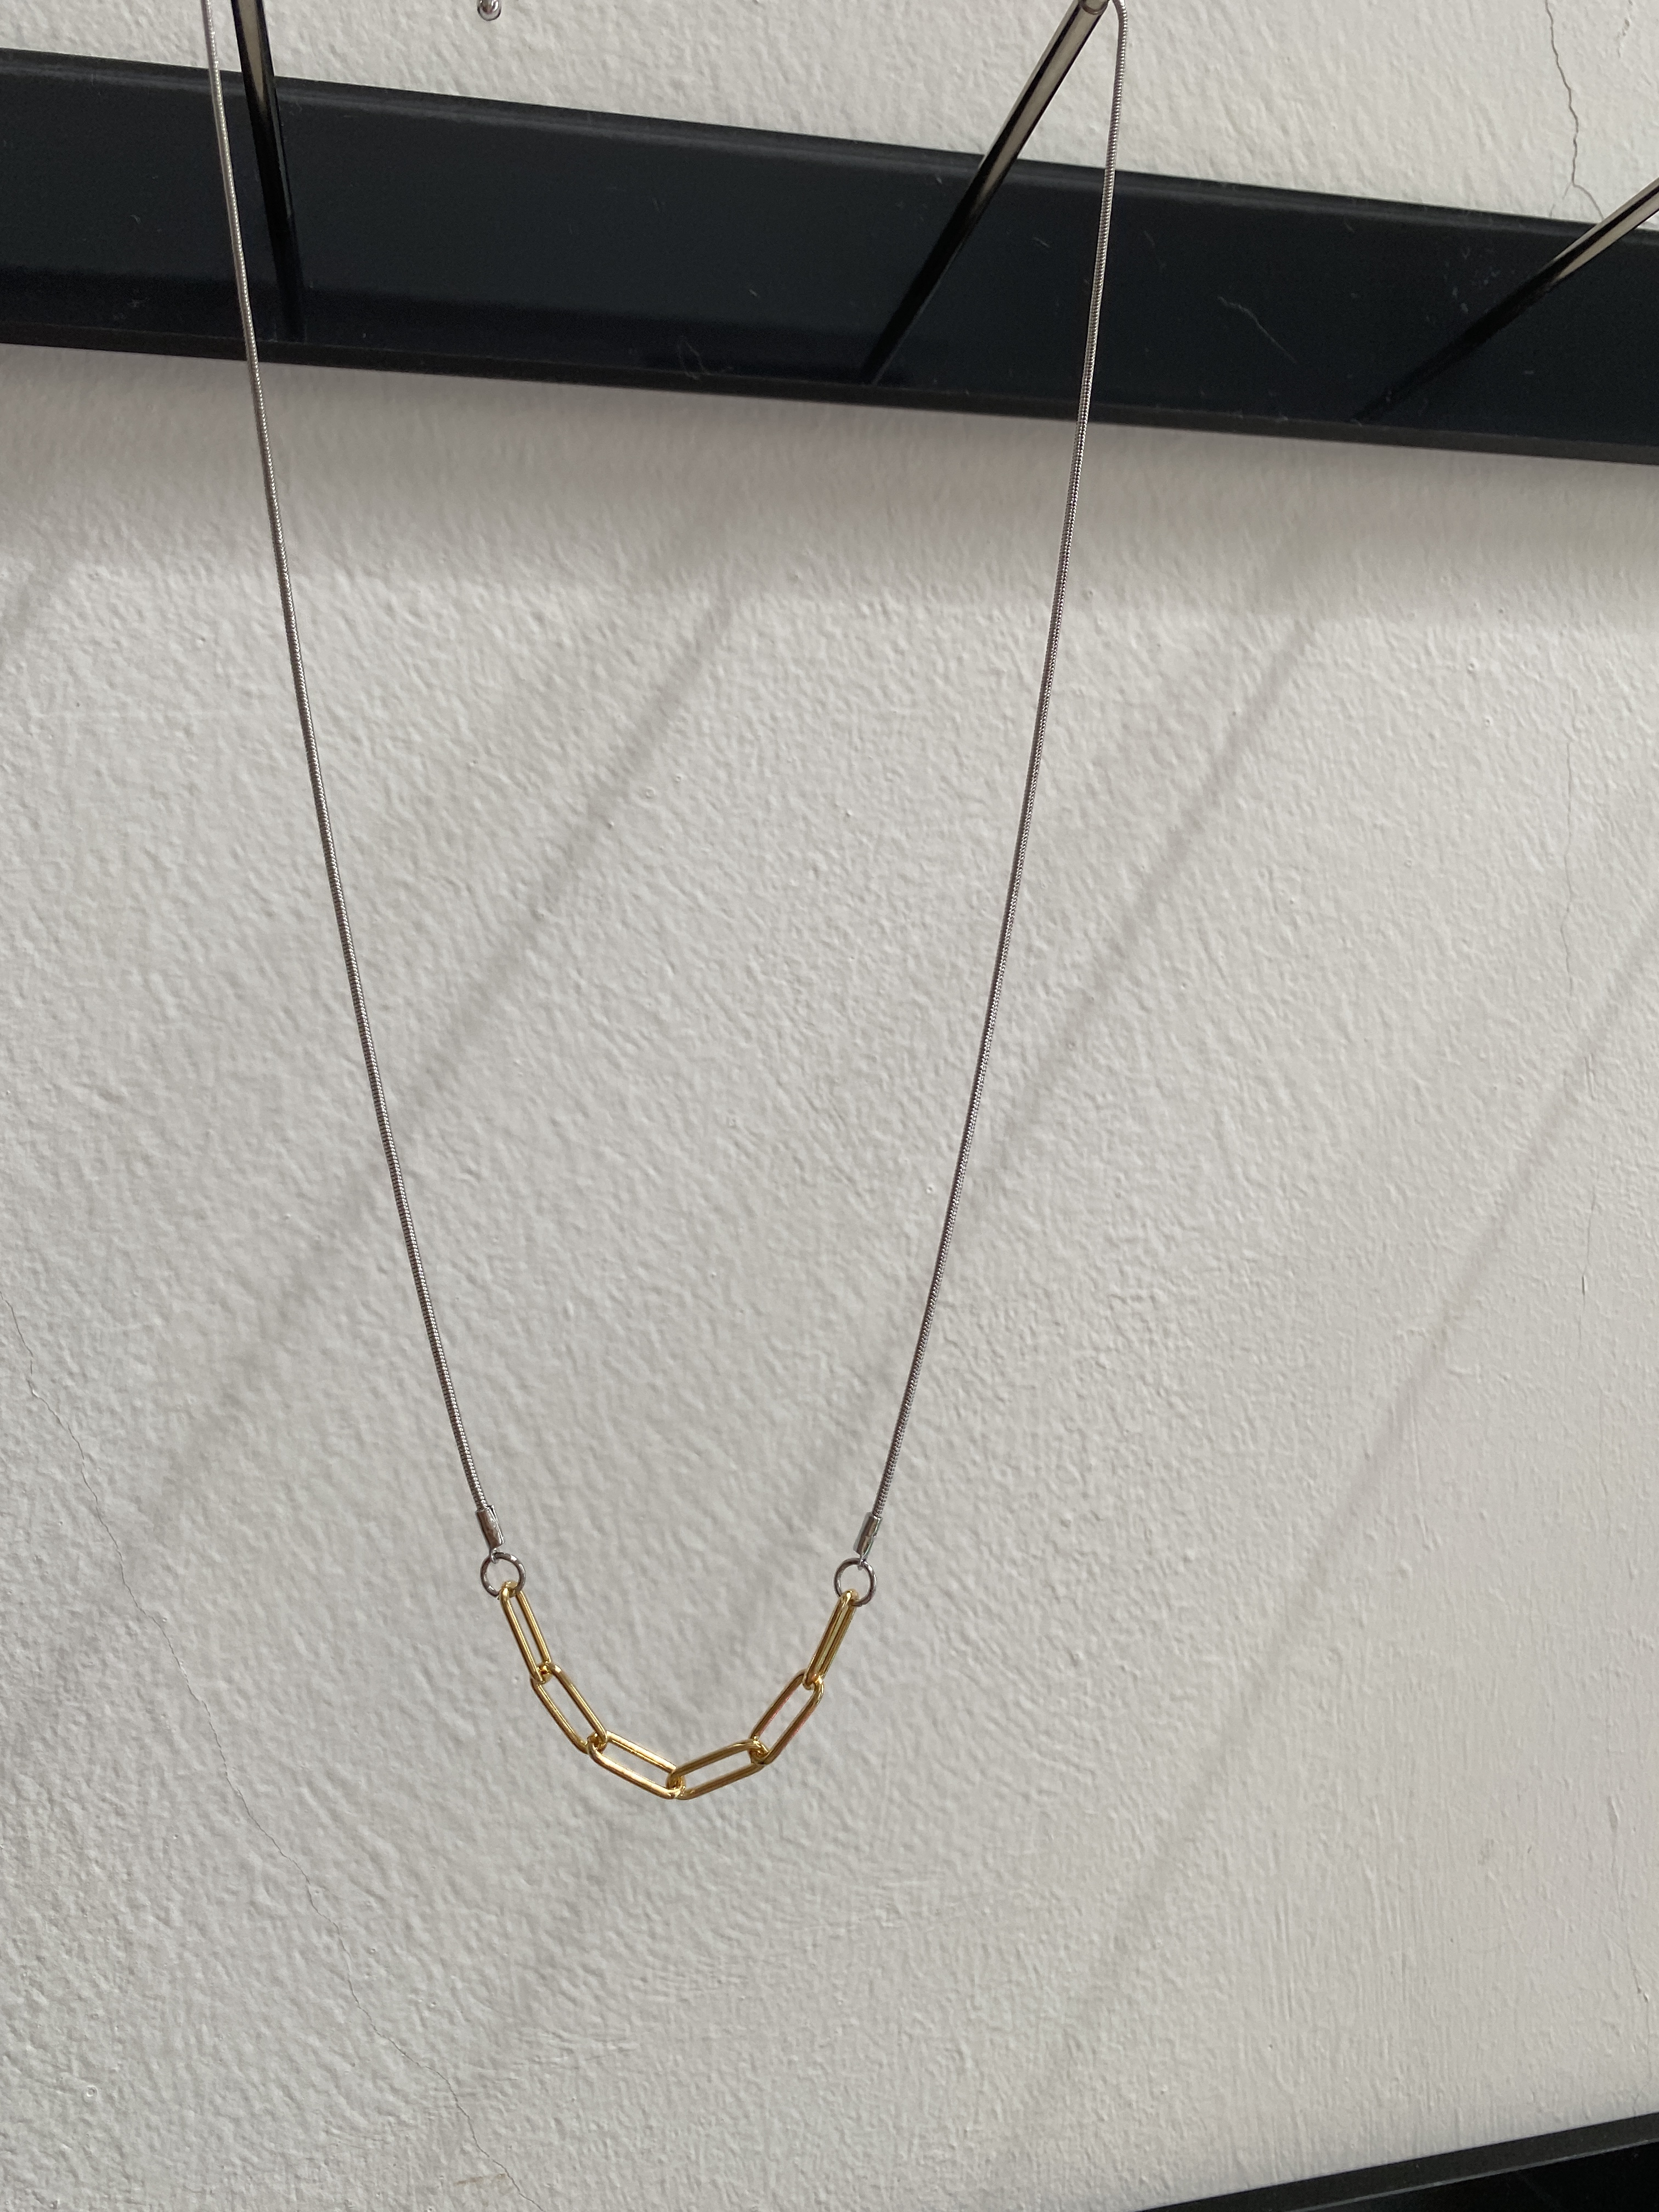 snake chain, gold loop chain at front necklace